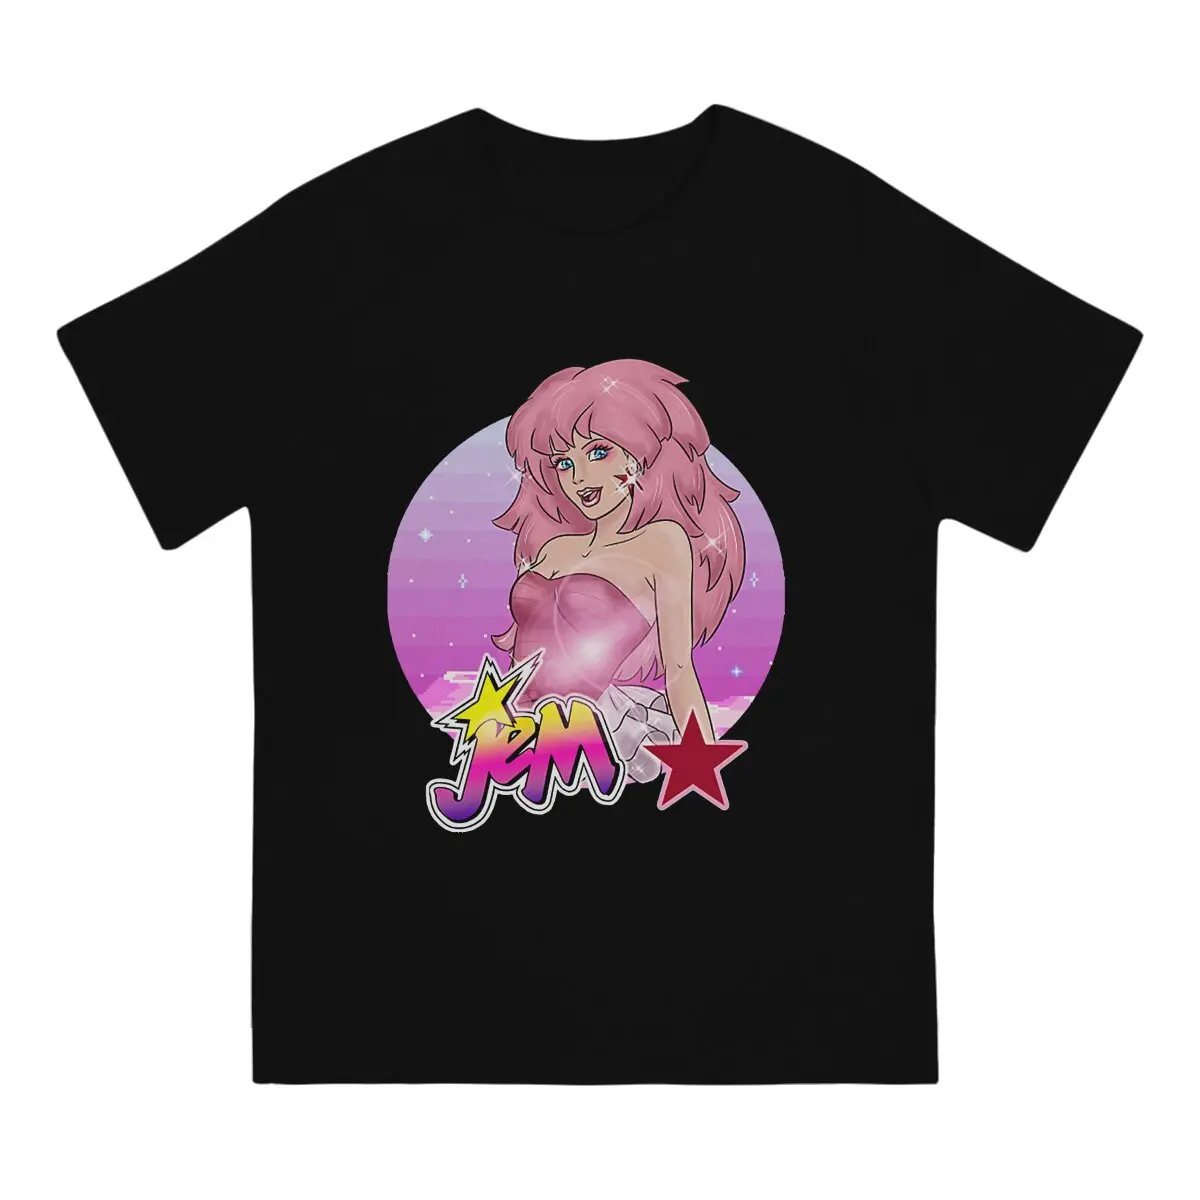 

Retro Classic T-Shirts Men Jem And The Holograms TV Casual Pure Cotton Tee Shirt Crew Neck Short Sleeve T Shirt Adult Clothing